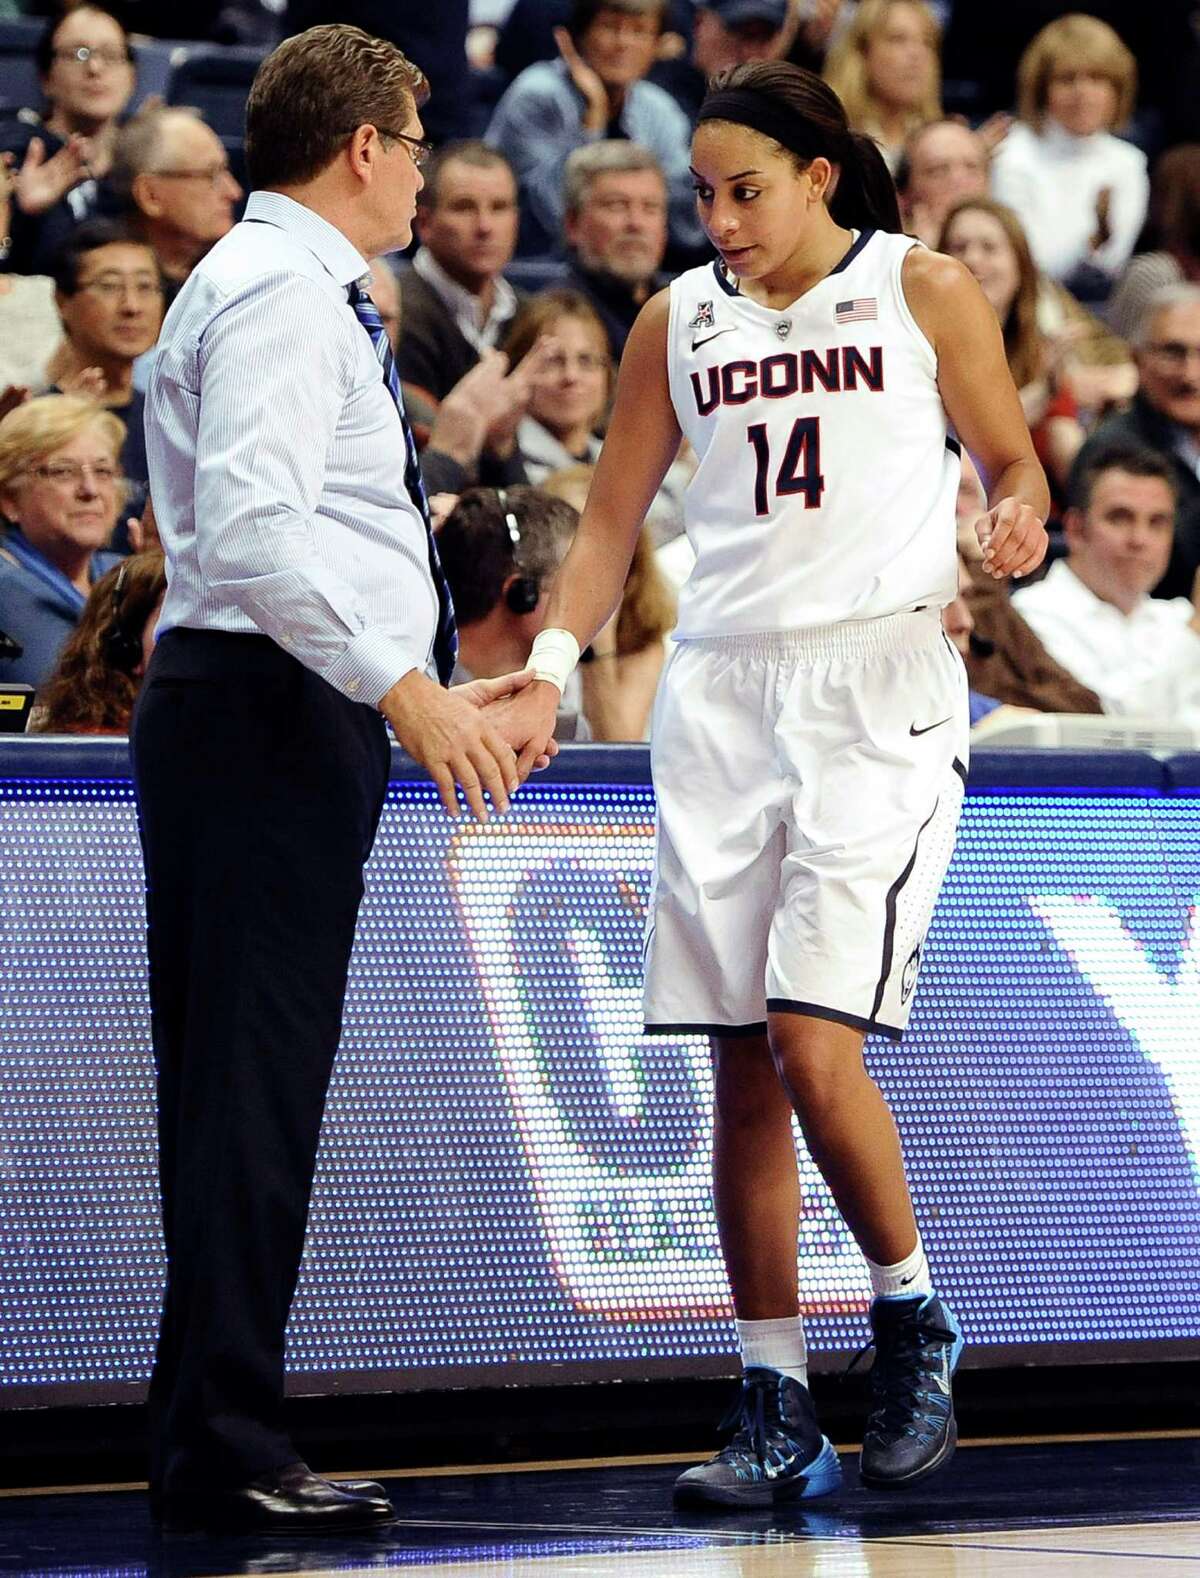 Connecticut's Bria Hartley, right, is greeted by Connecticut head coach Geno Auriemma during the second half of an NCAA college basketball game, Monday, Nov. 11, 2013, in Storrs, Conn. Hartley was top scorer for Connecticut with 20 points. Connecticut won 76-57.